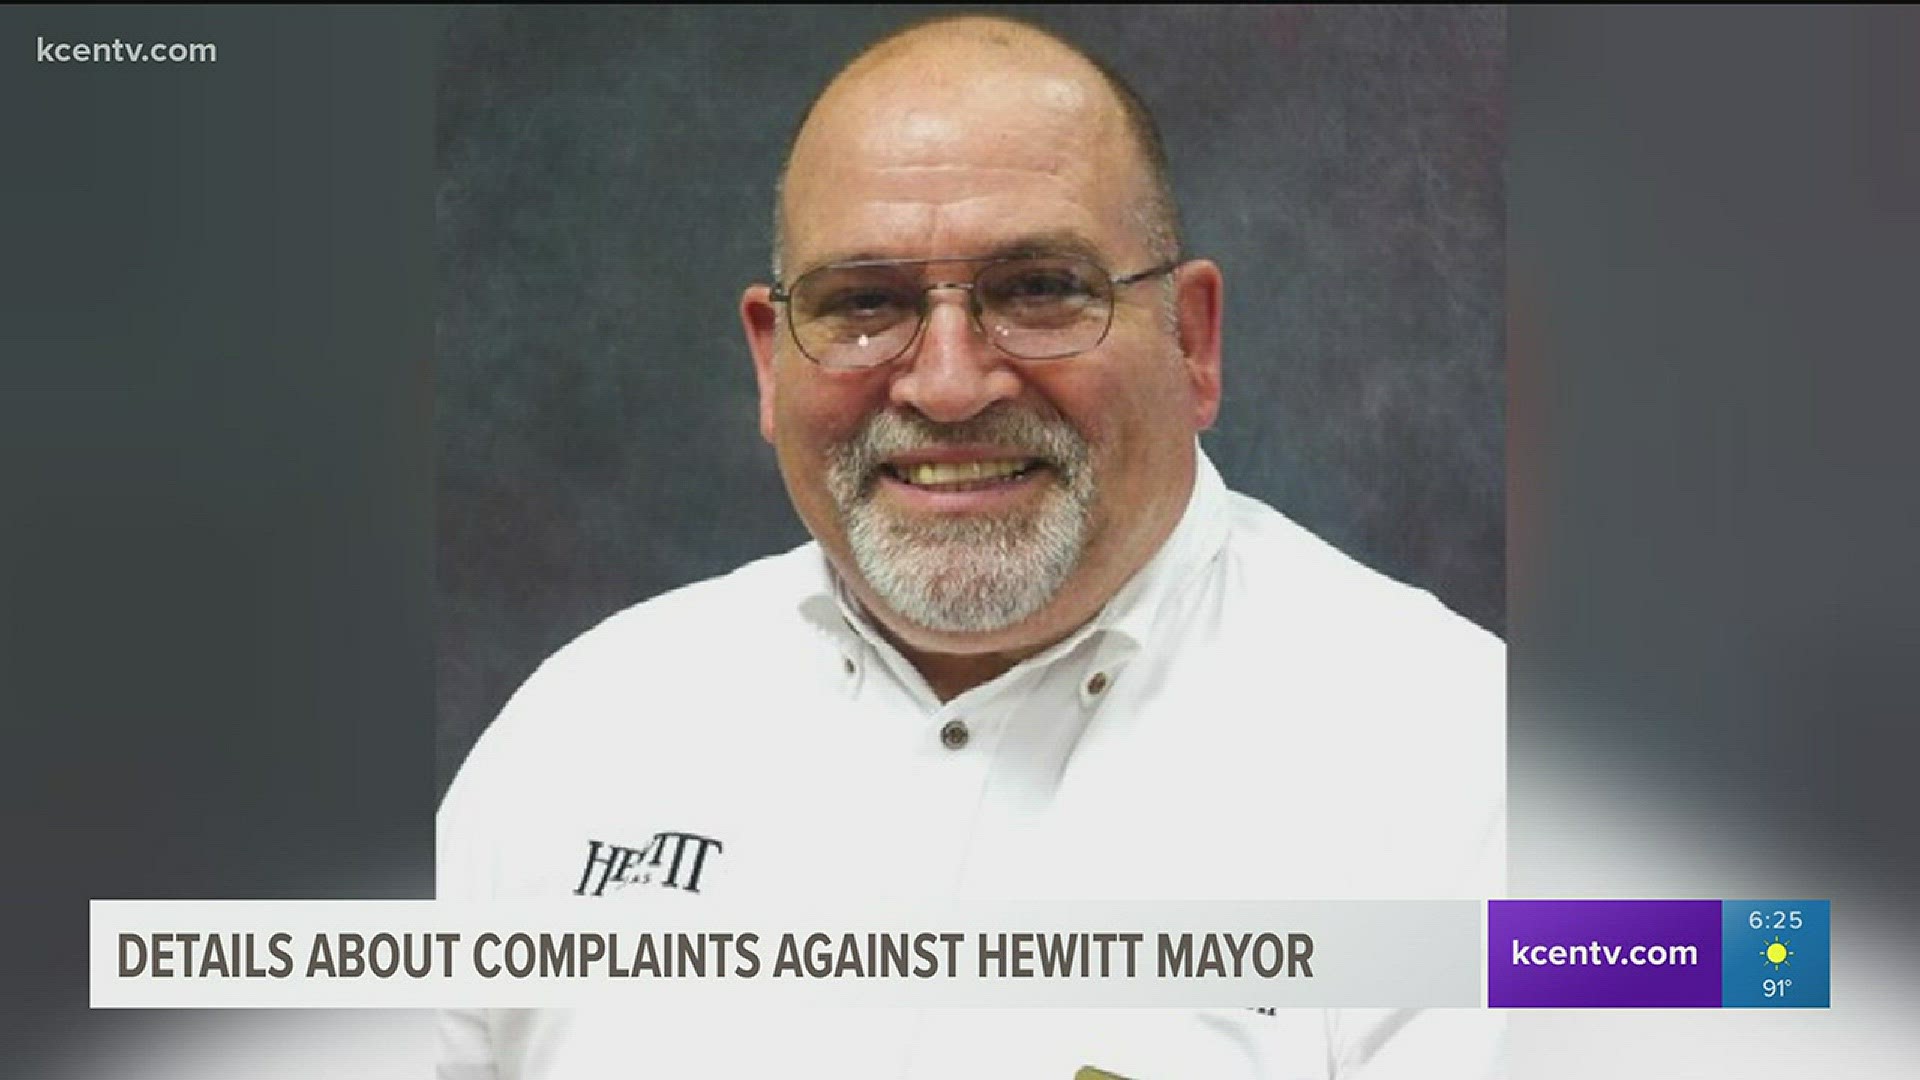 New details about the complaints filed against Hewitt City Mayor Ed Passalugo.